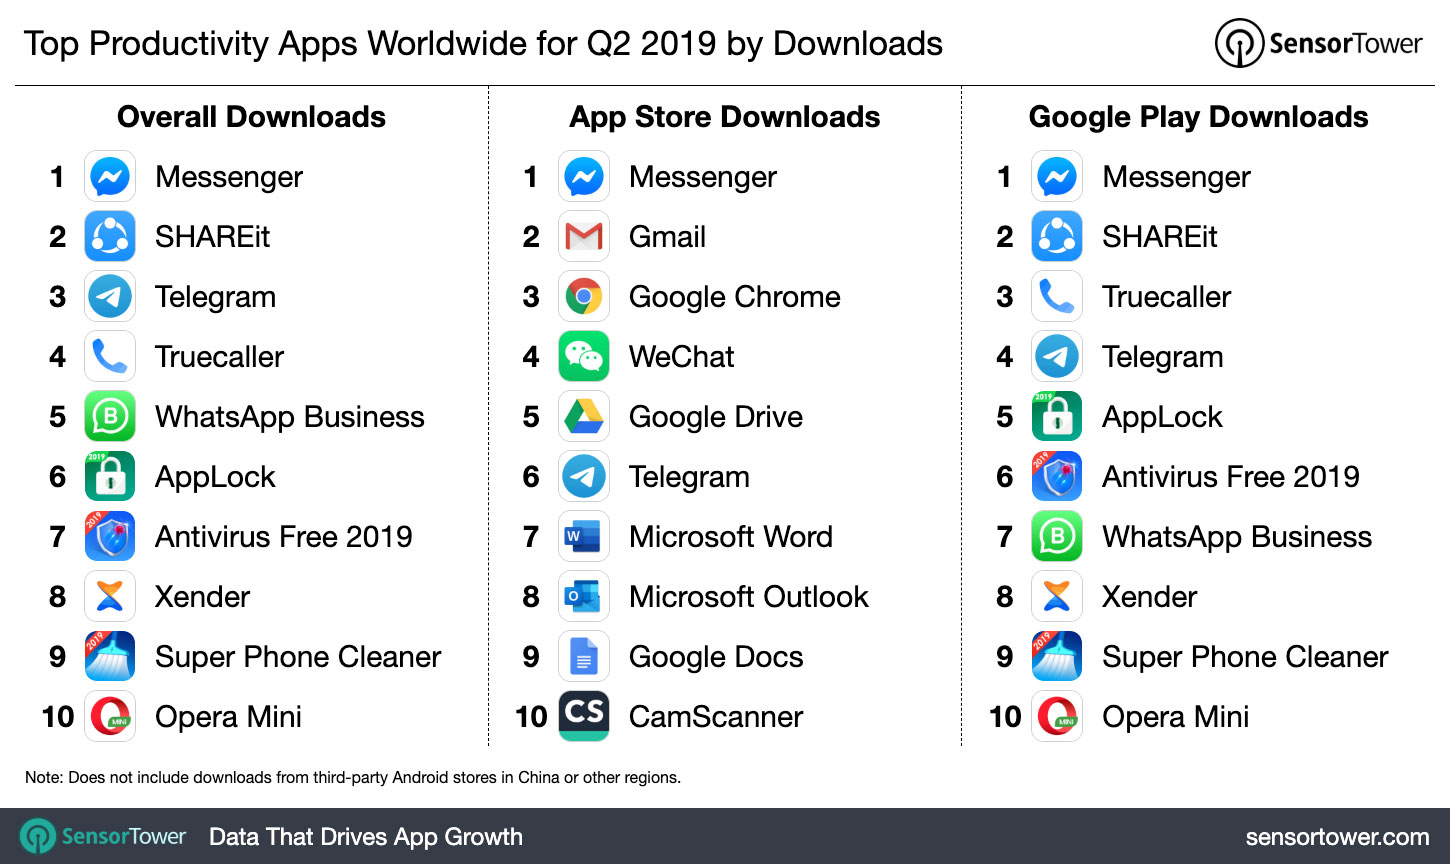 Top Productivity Category Apps Worldwide for Q2 2019 by Downloads